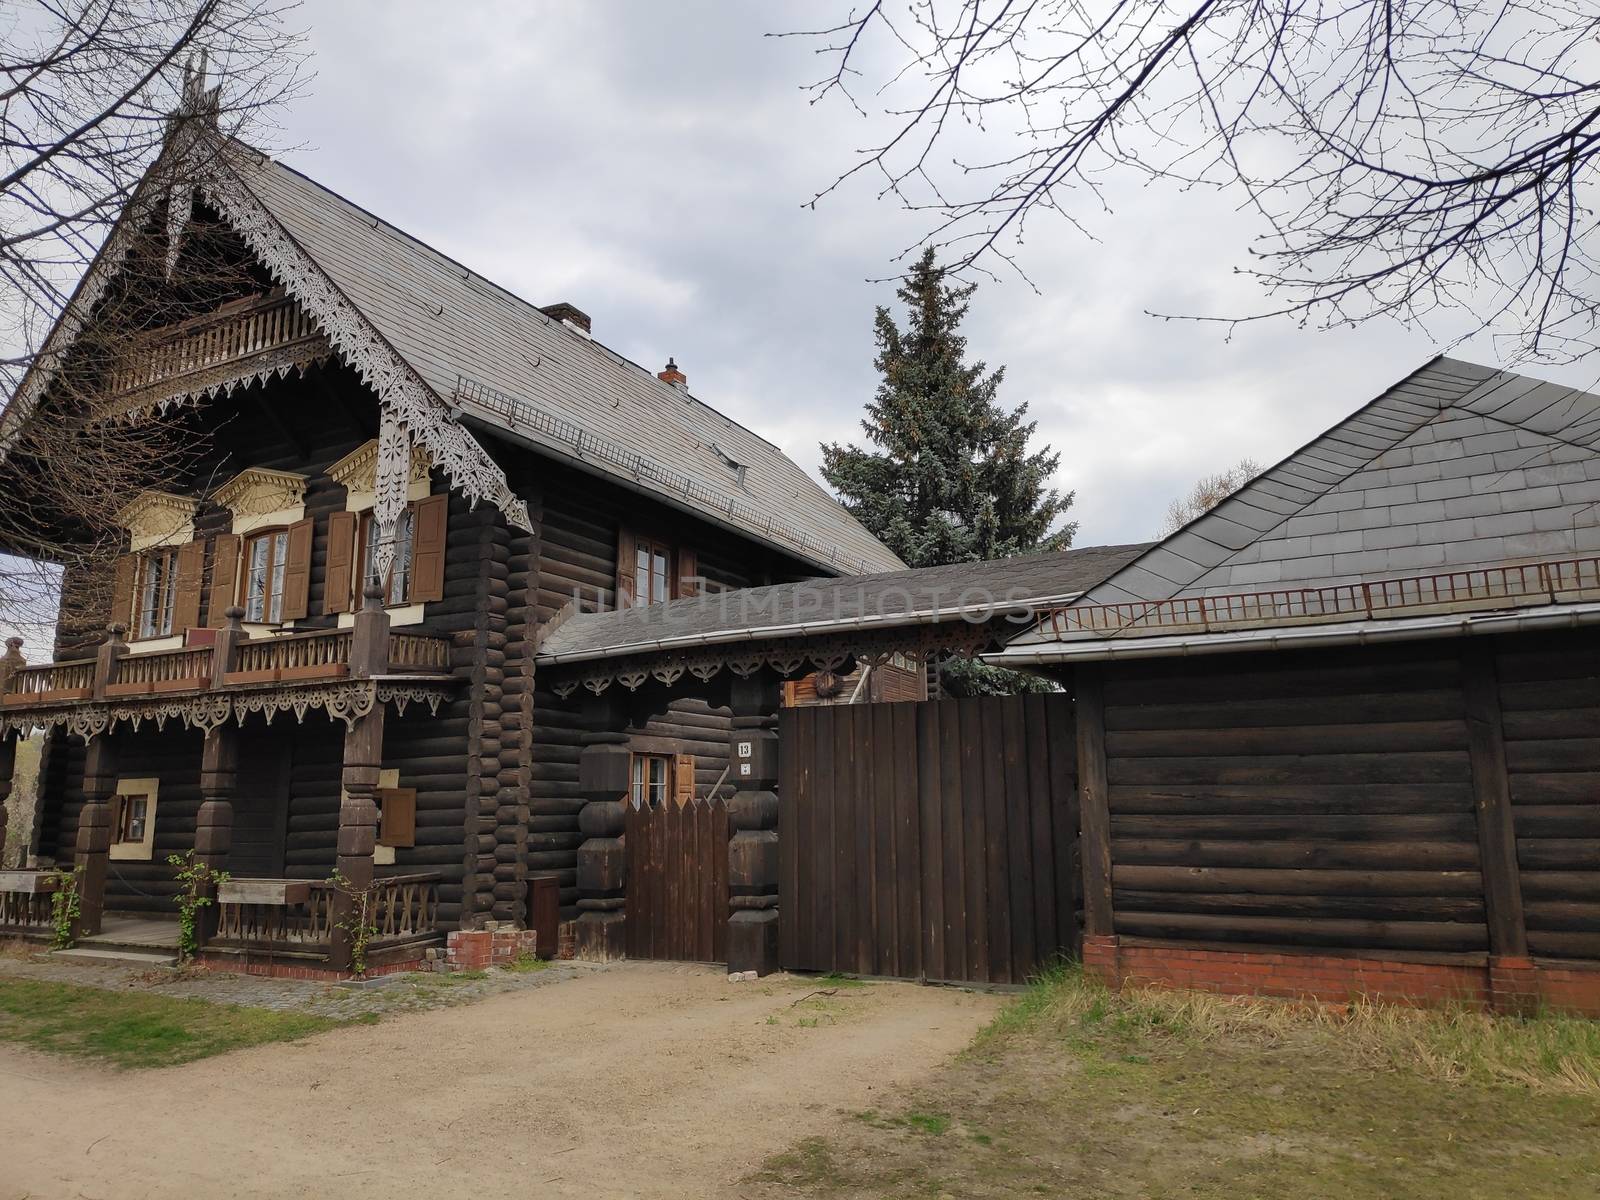 Typical wooden hous in the Alexandrovka settlement Potsdam, Germany